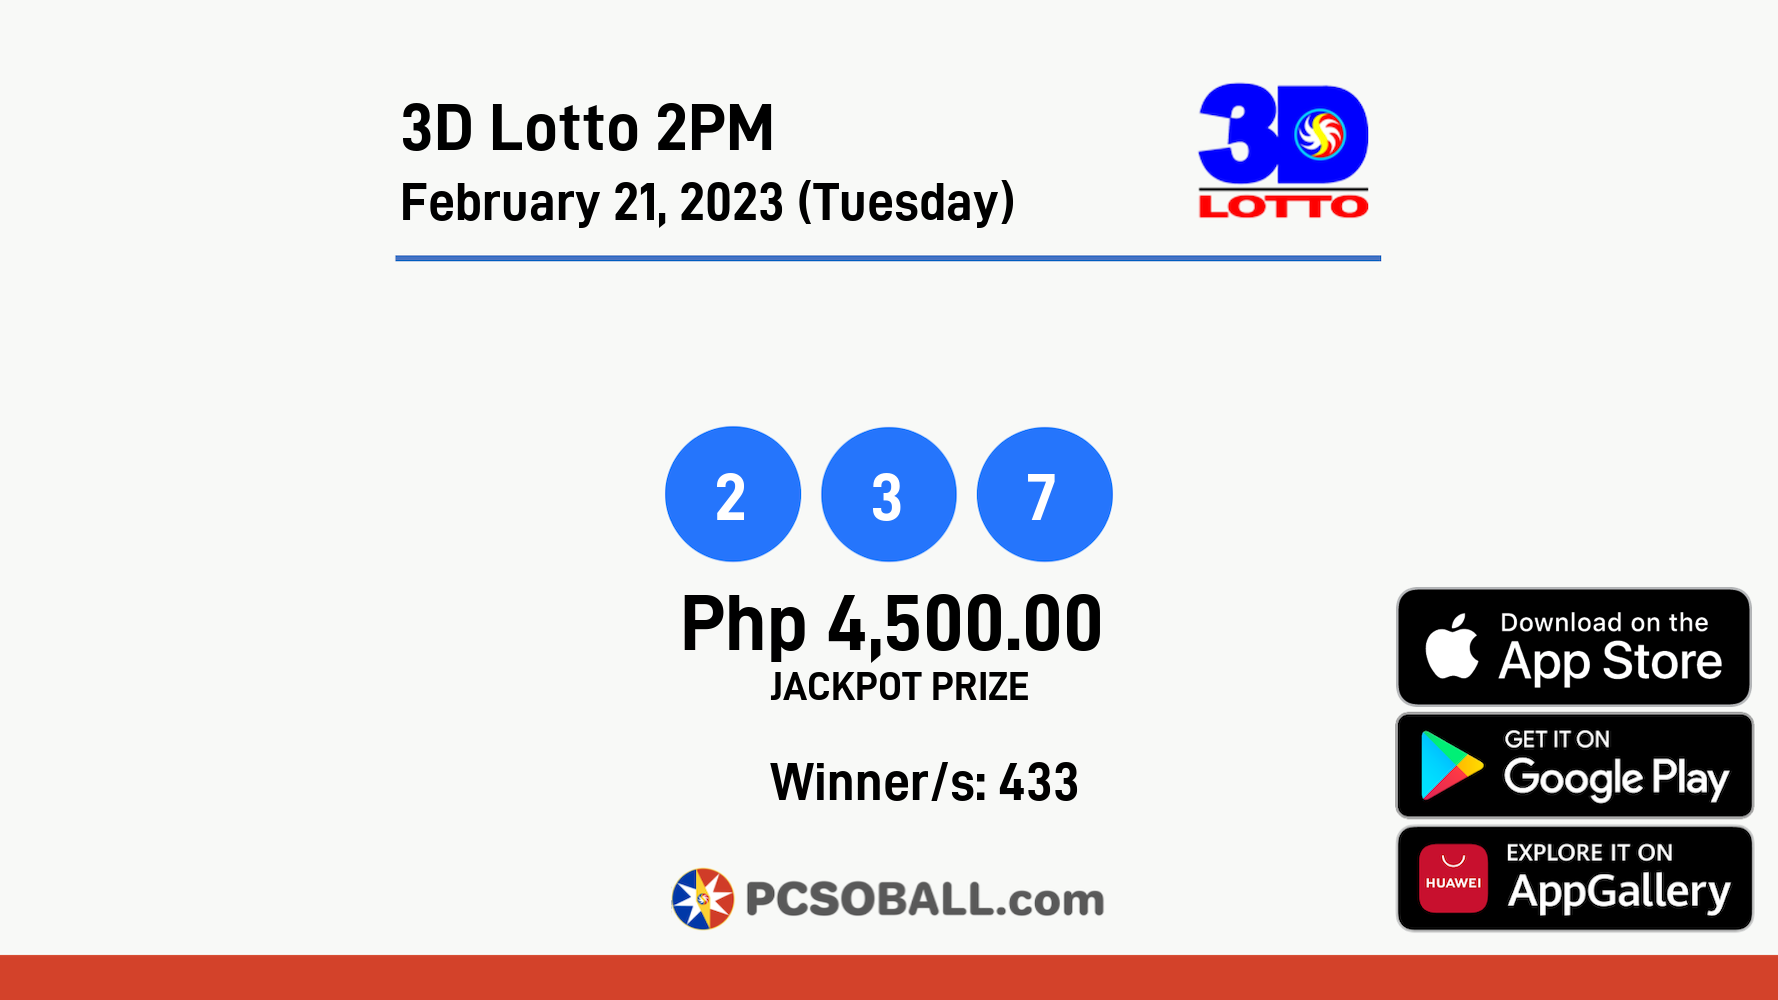 3D Lotto 2PM February 21, 2023 (Tuesday) Result